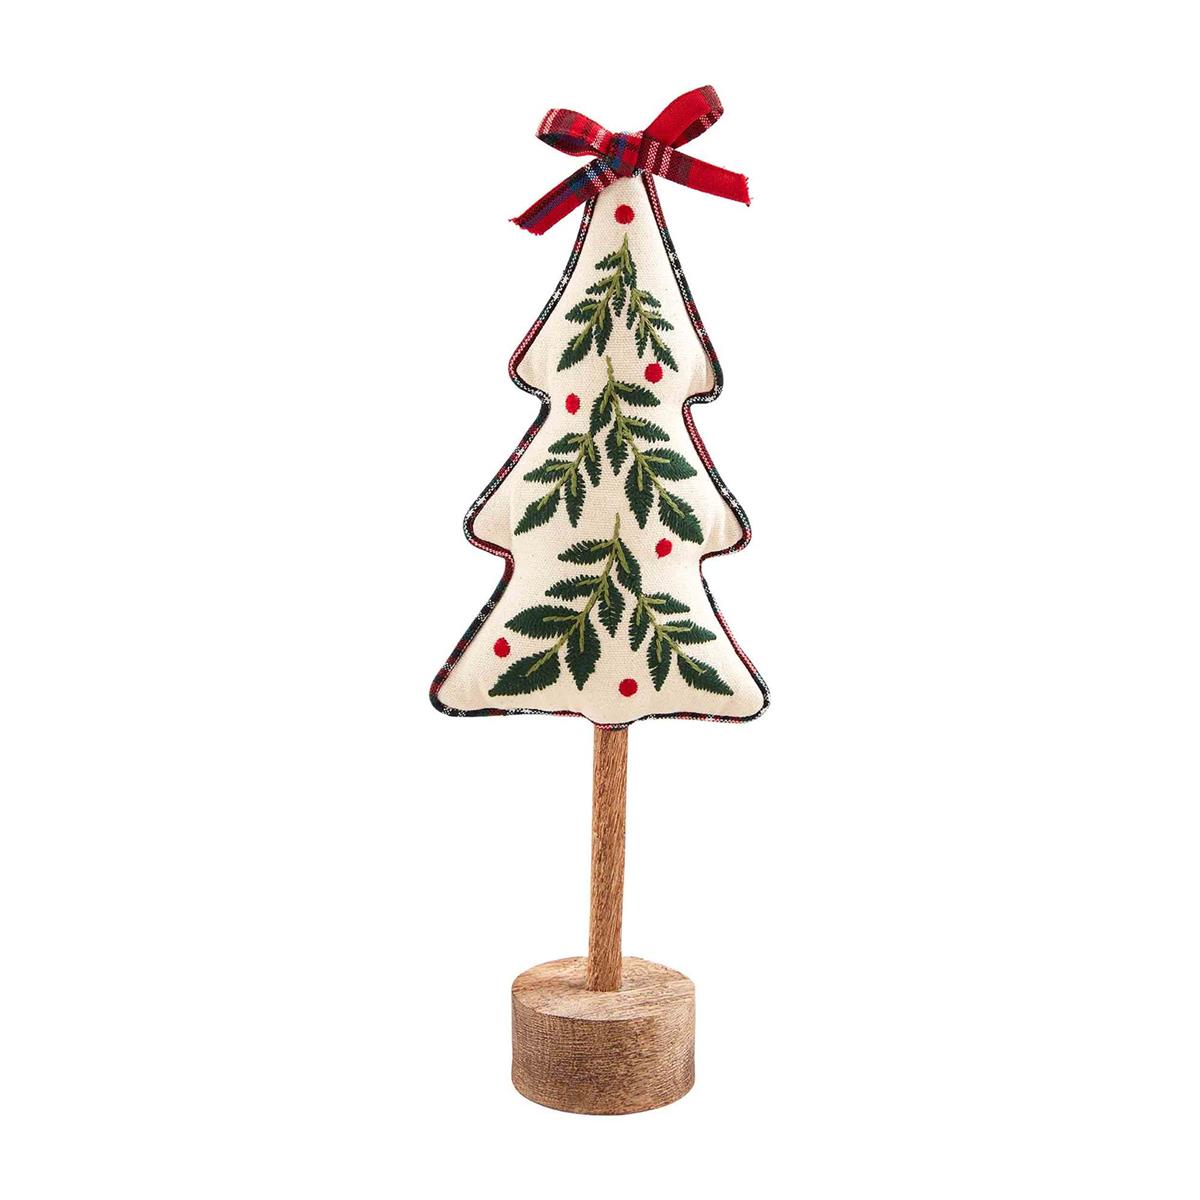 small embroidered holly tree sitter displayed against a white background